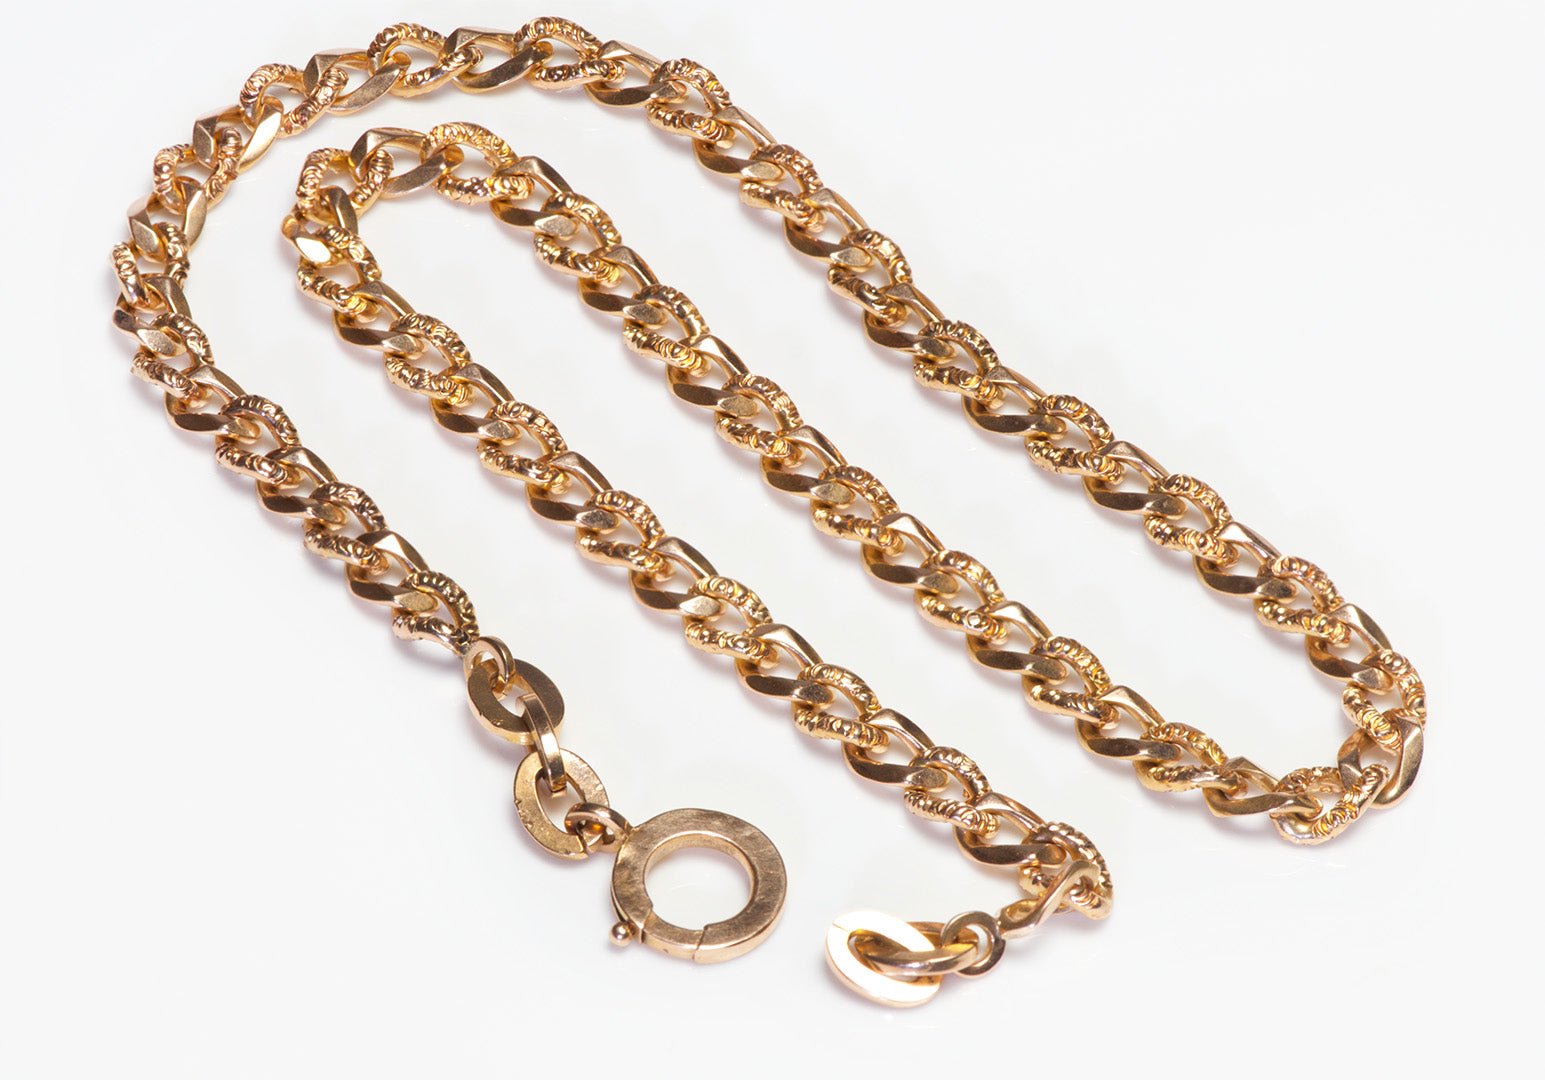 Antique 18K Gold Fancy Link Watch Chain - DSF Antique Jewelry